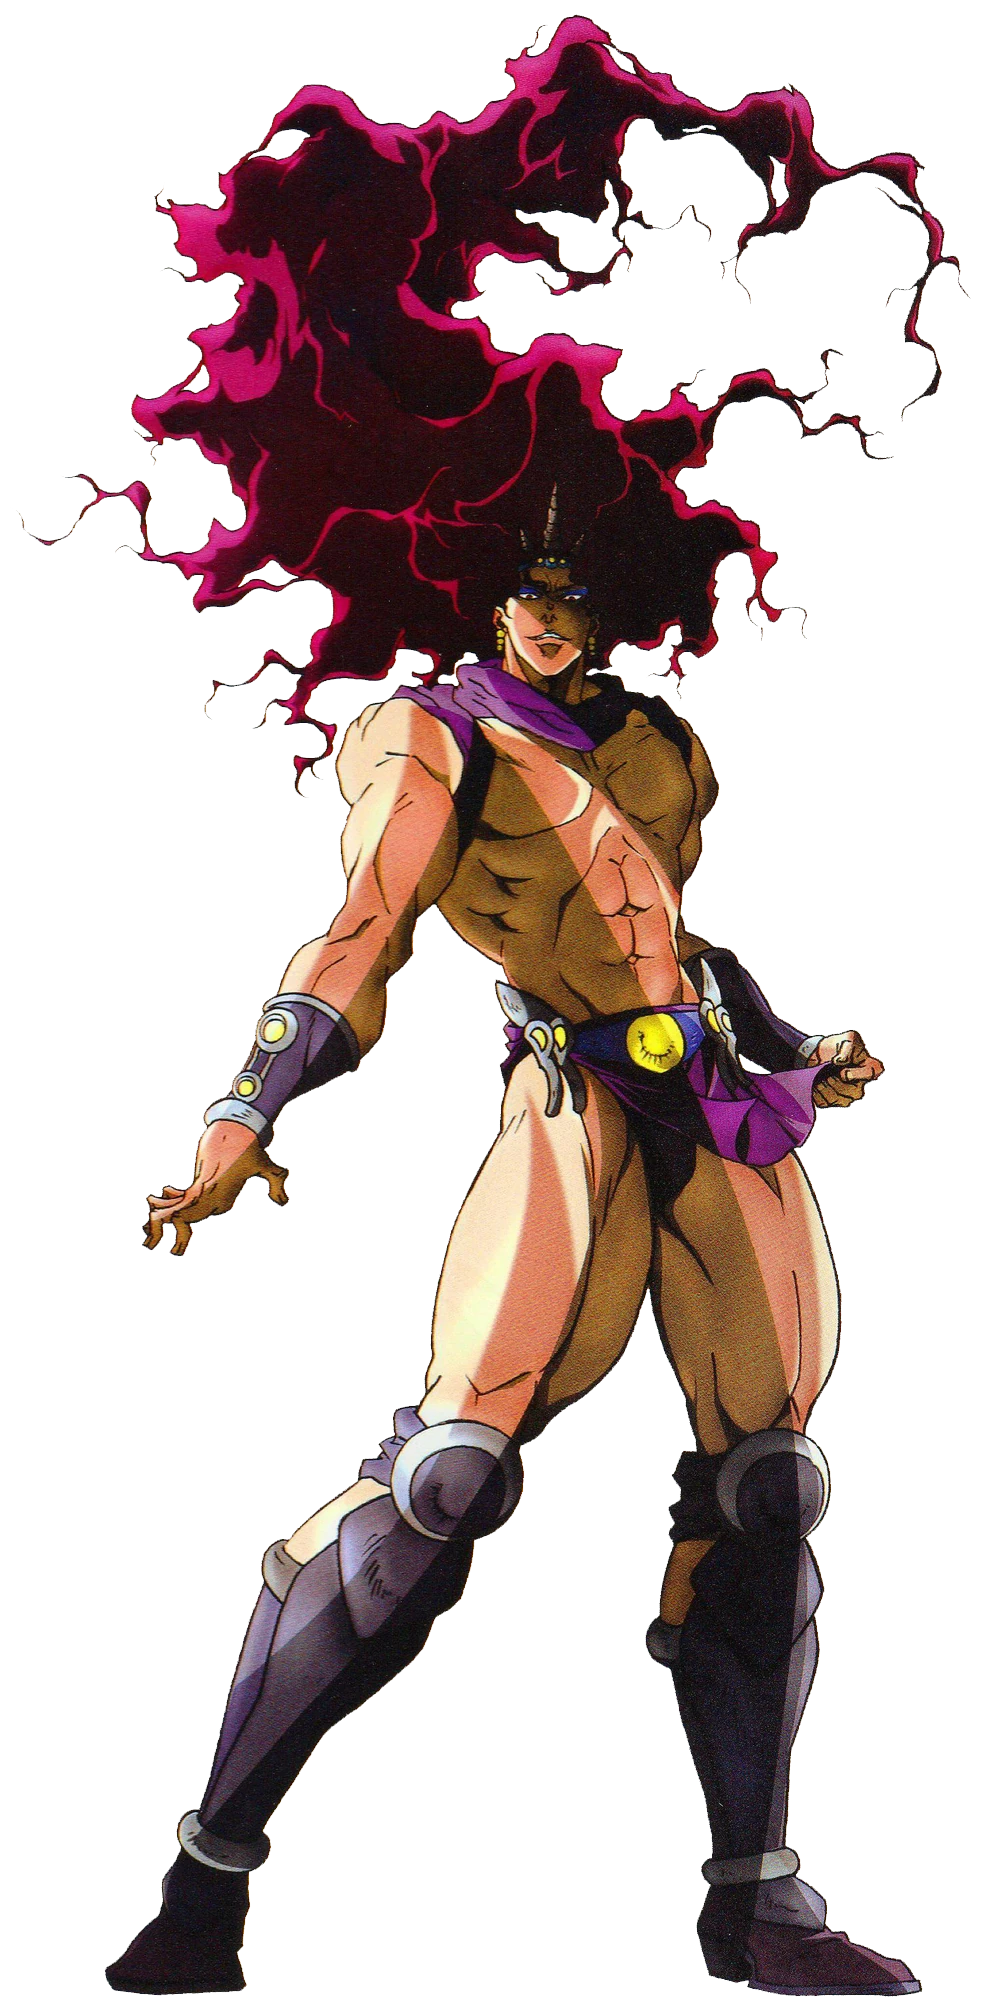 You are now the Ultimate Lifeform (JoJo) of any universe (anime, Comic,  Game, etc.) of your choice. What do you pick, and how would you beat Kars?  - Quora